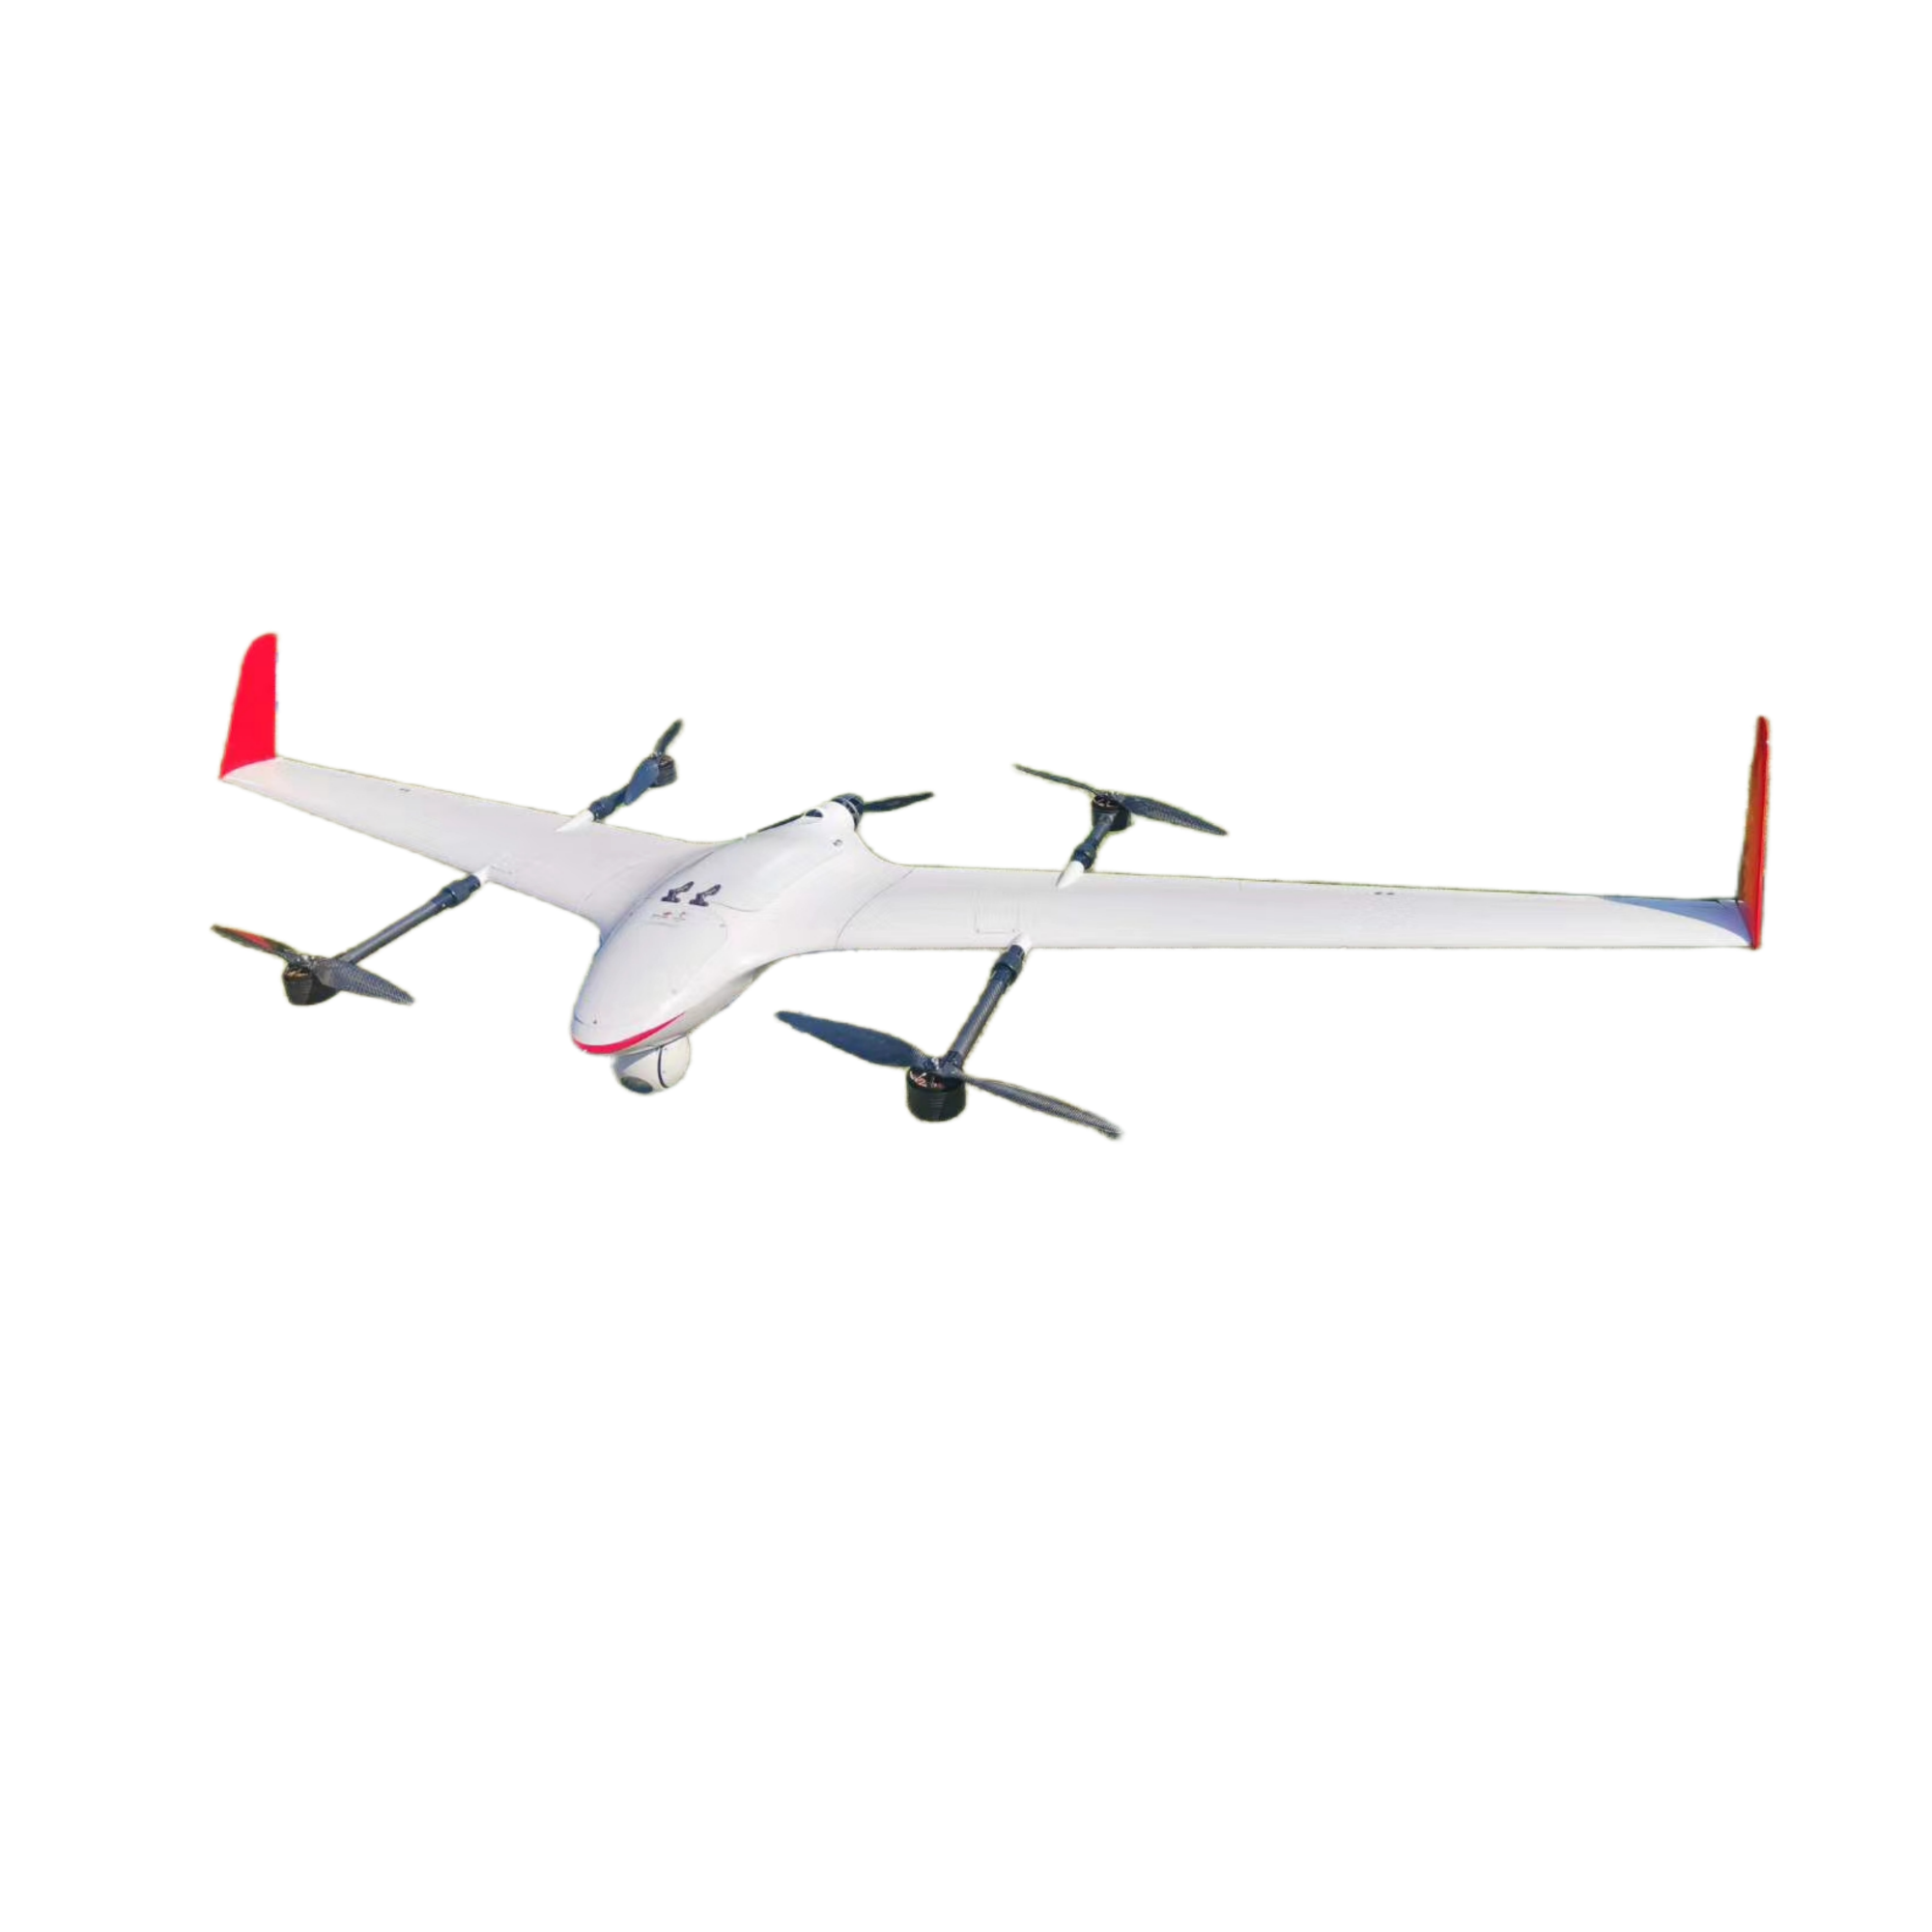 UnmannedRC Frigate VTOL Plane For Drone Mapping and Aerial Surveying - Unmanned RC